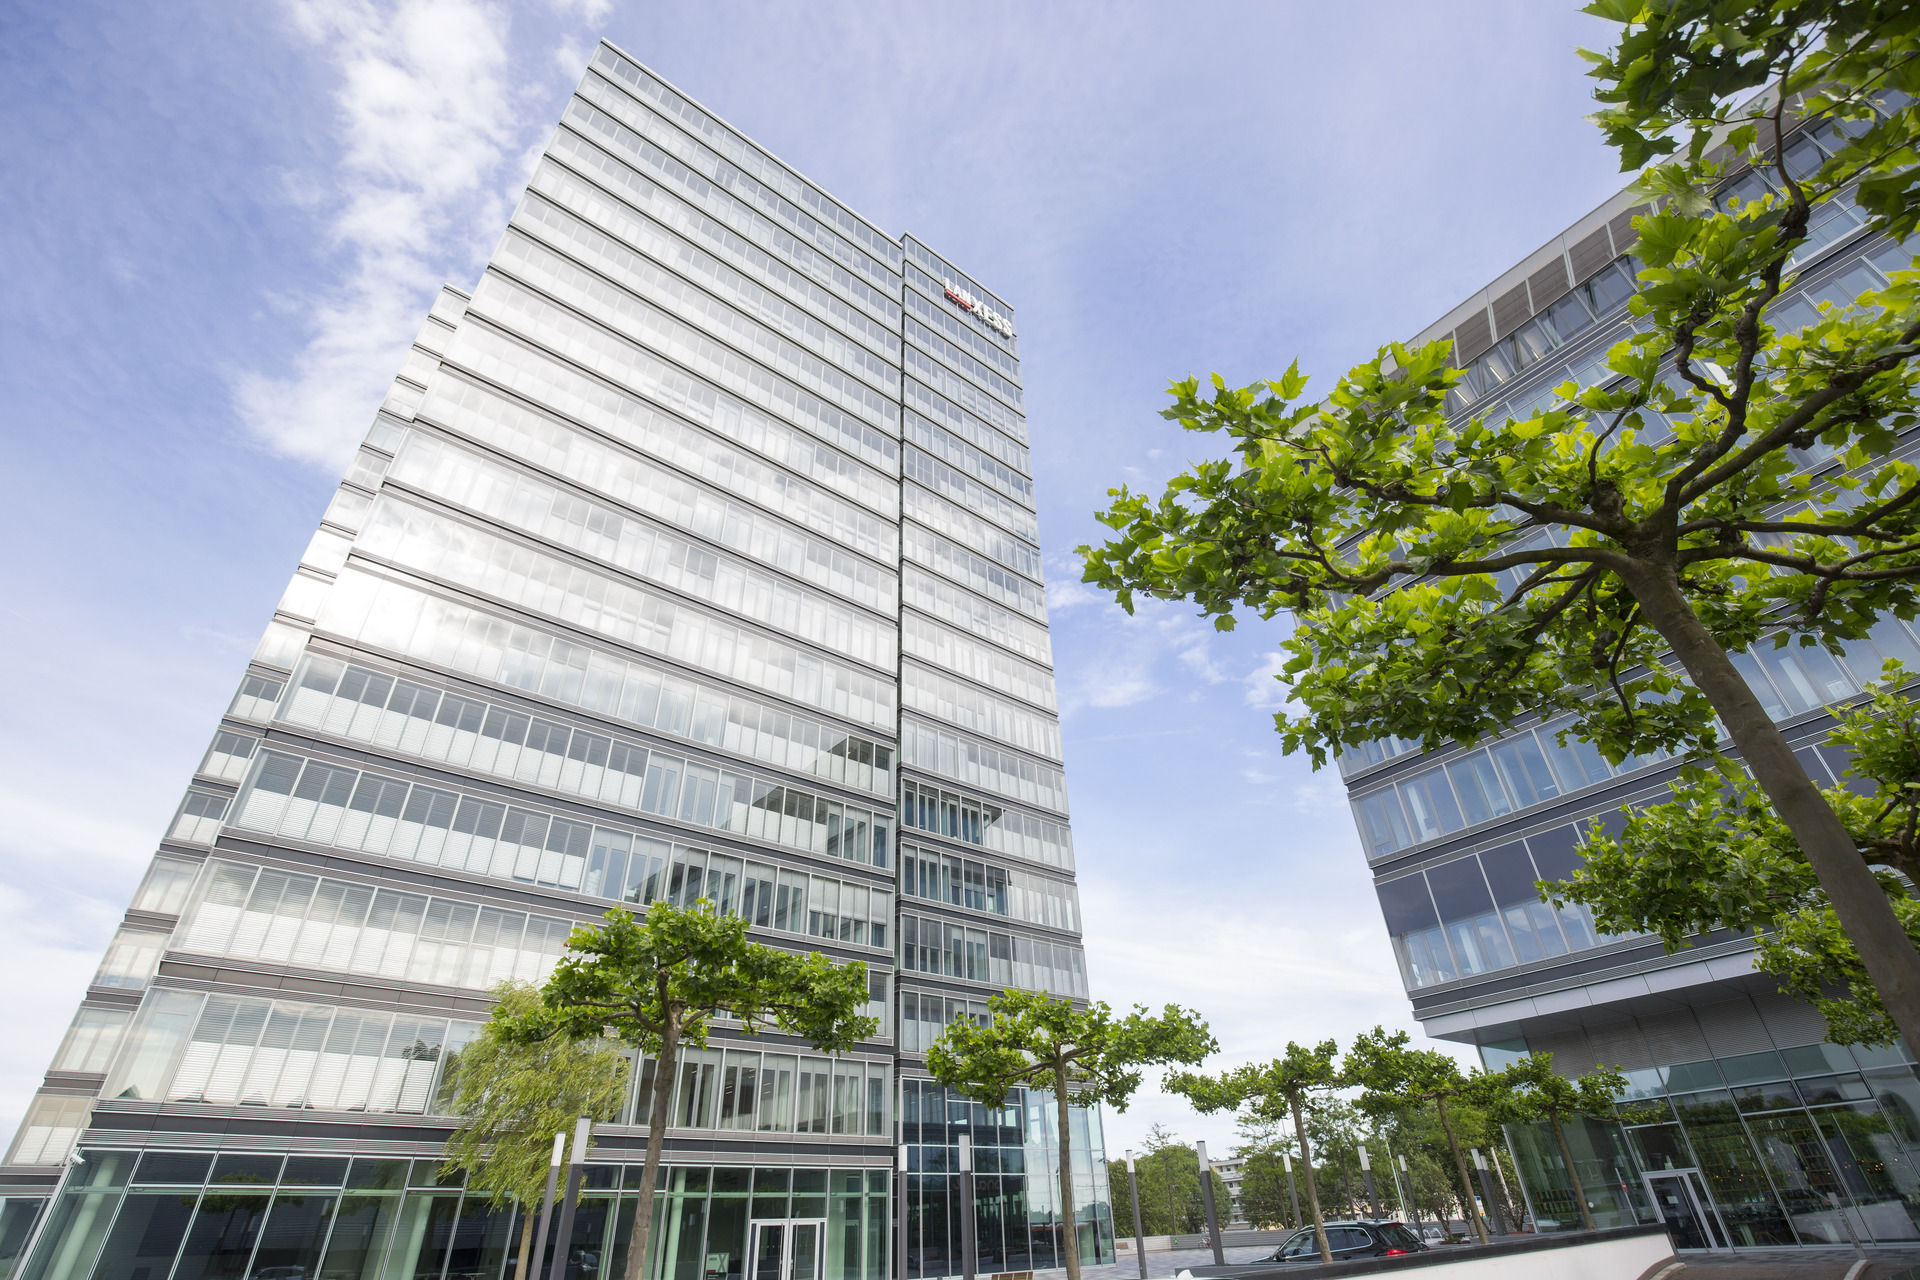 LANXESS management makes sustainability its business